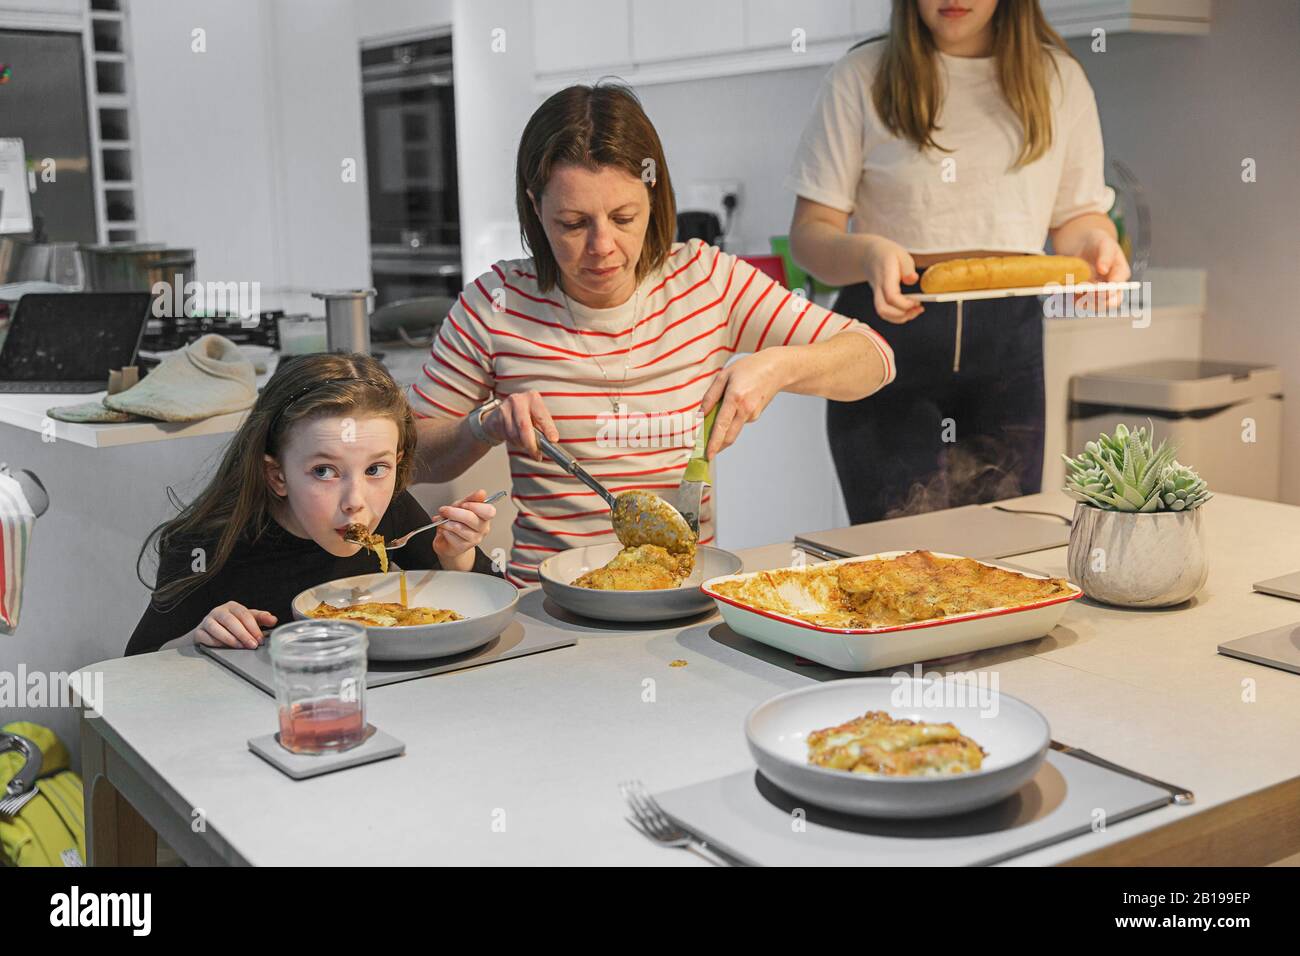 Family mealtime - lasagne Stock Photo